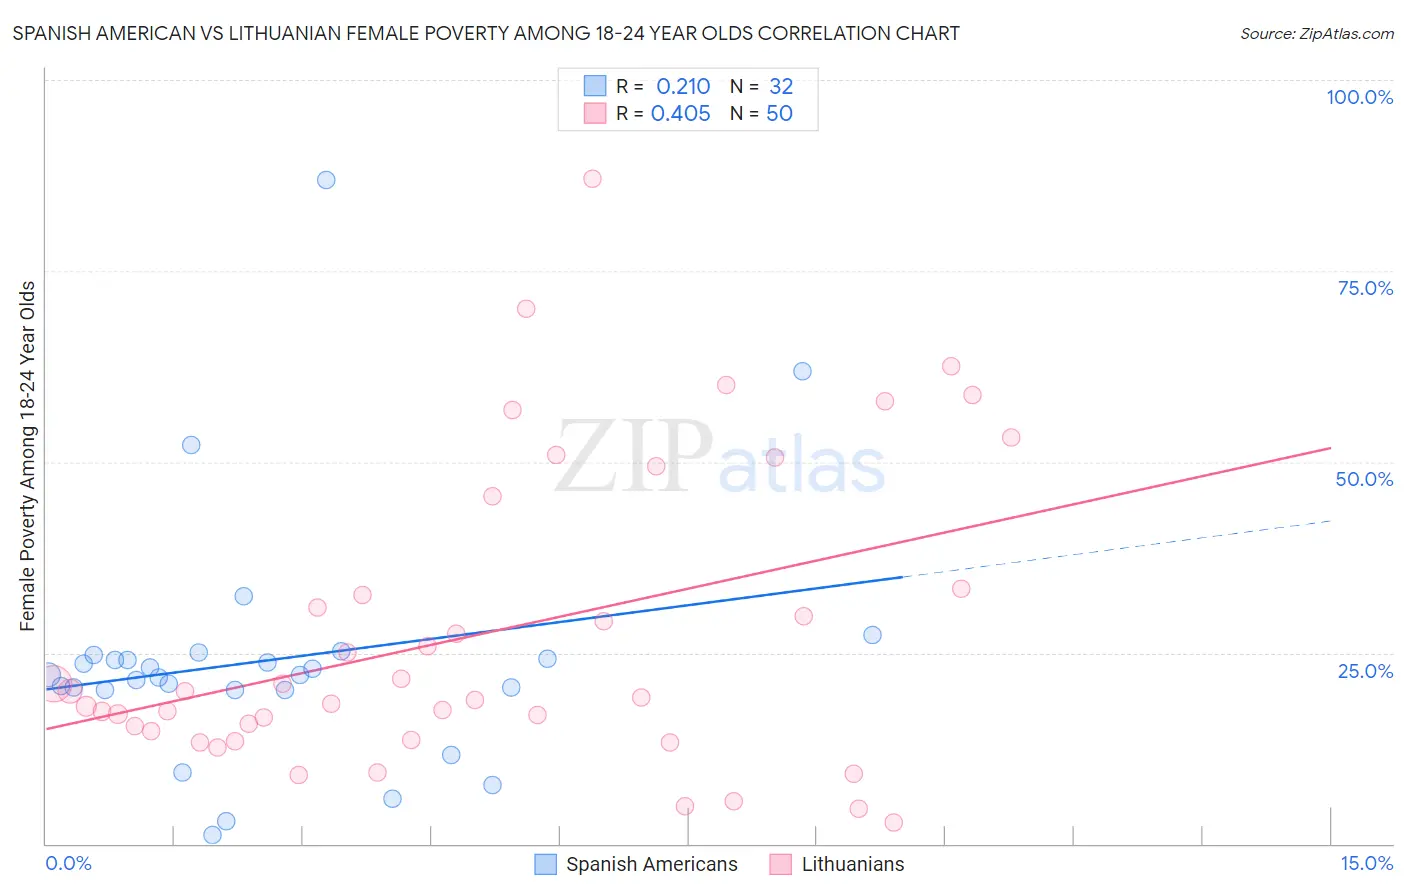 Spanish American vs Lithuanian Female Poverty Among 18-24 Year Olds